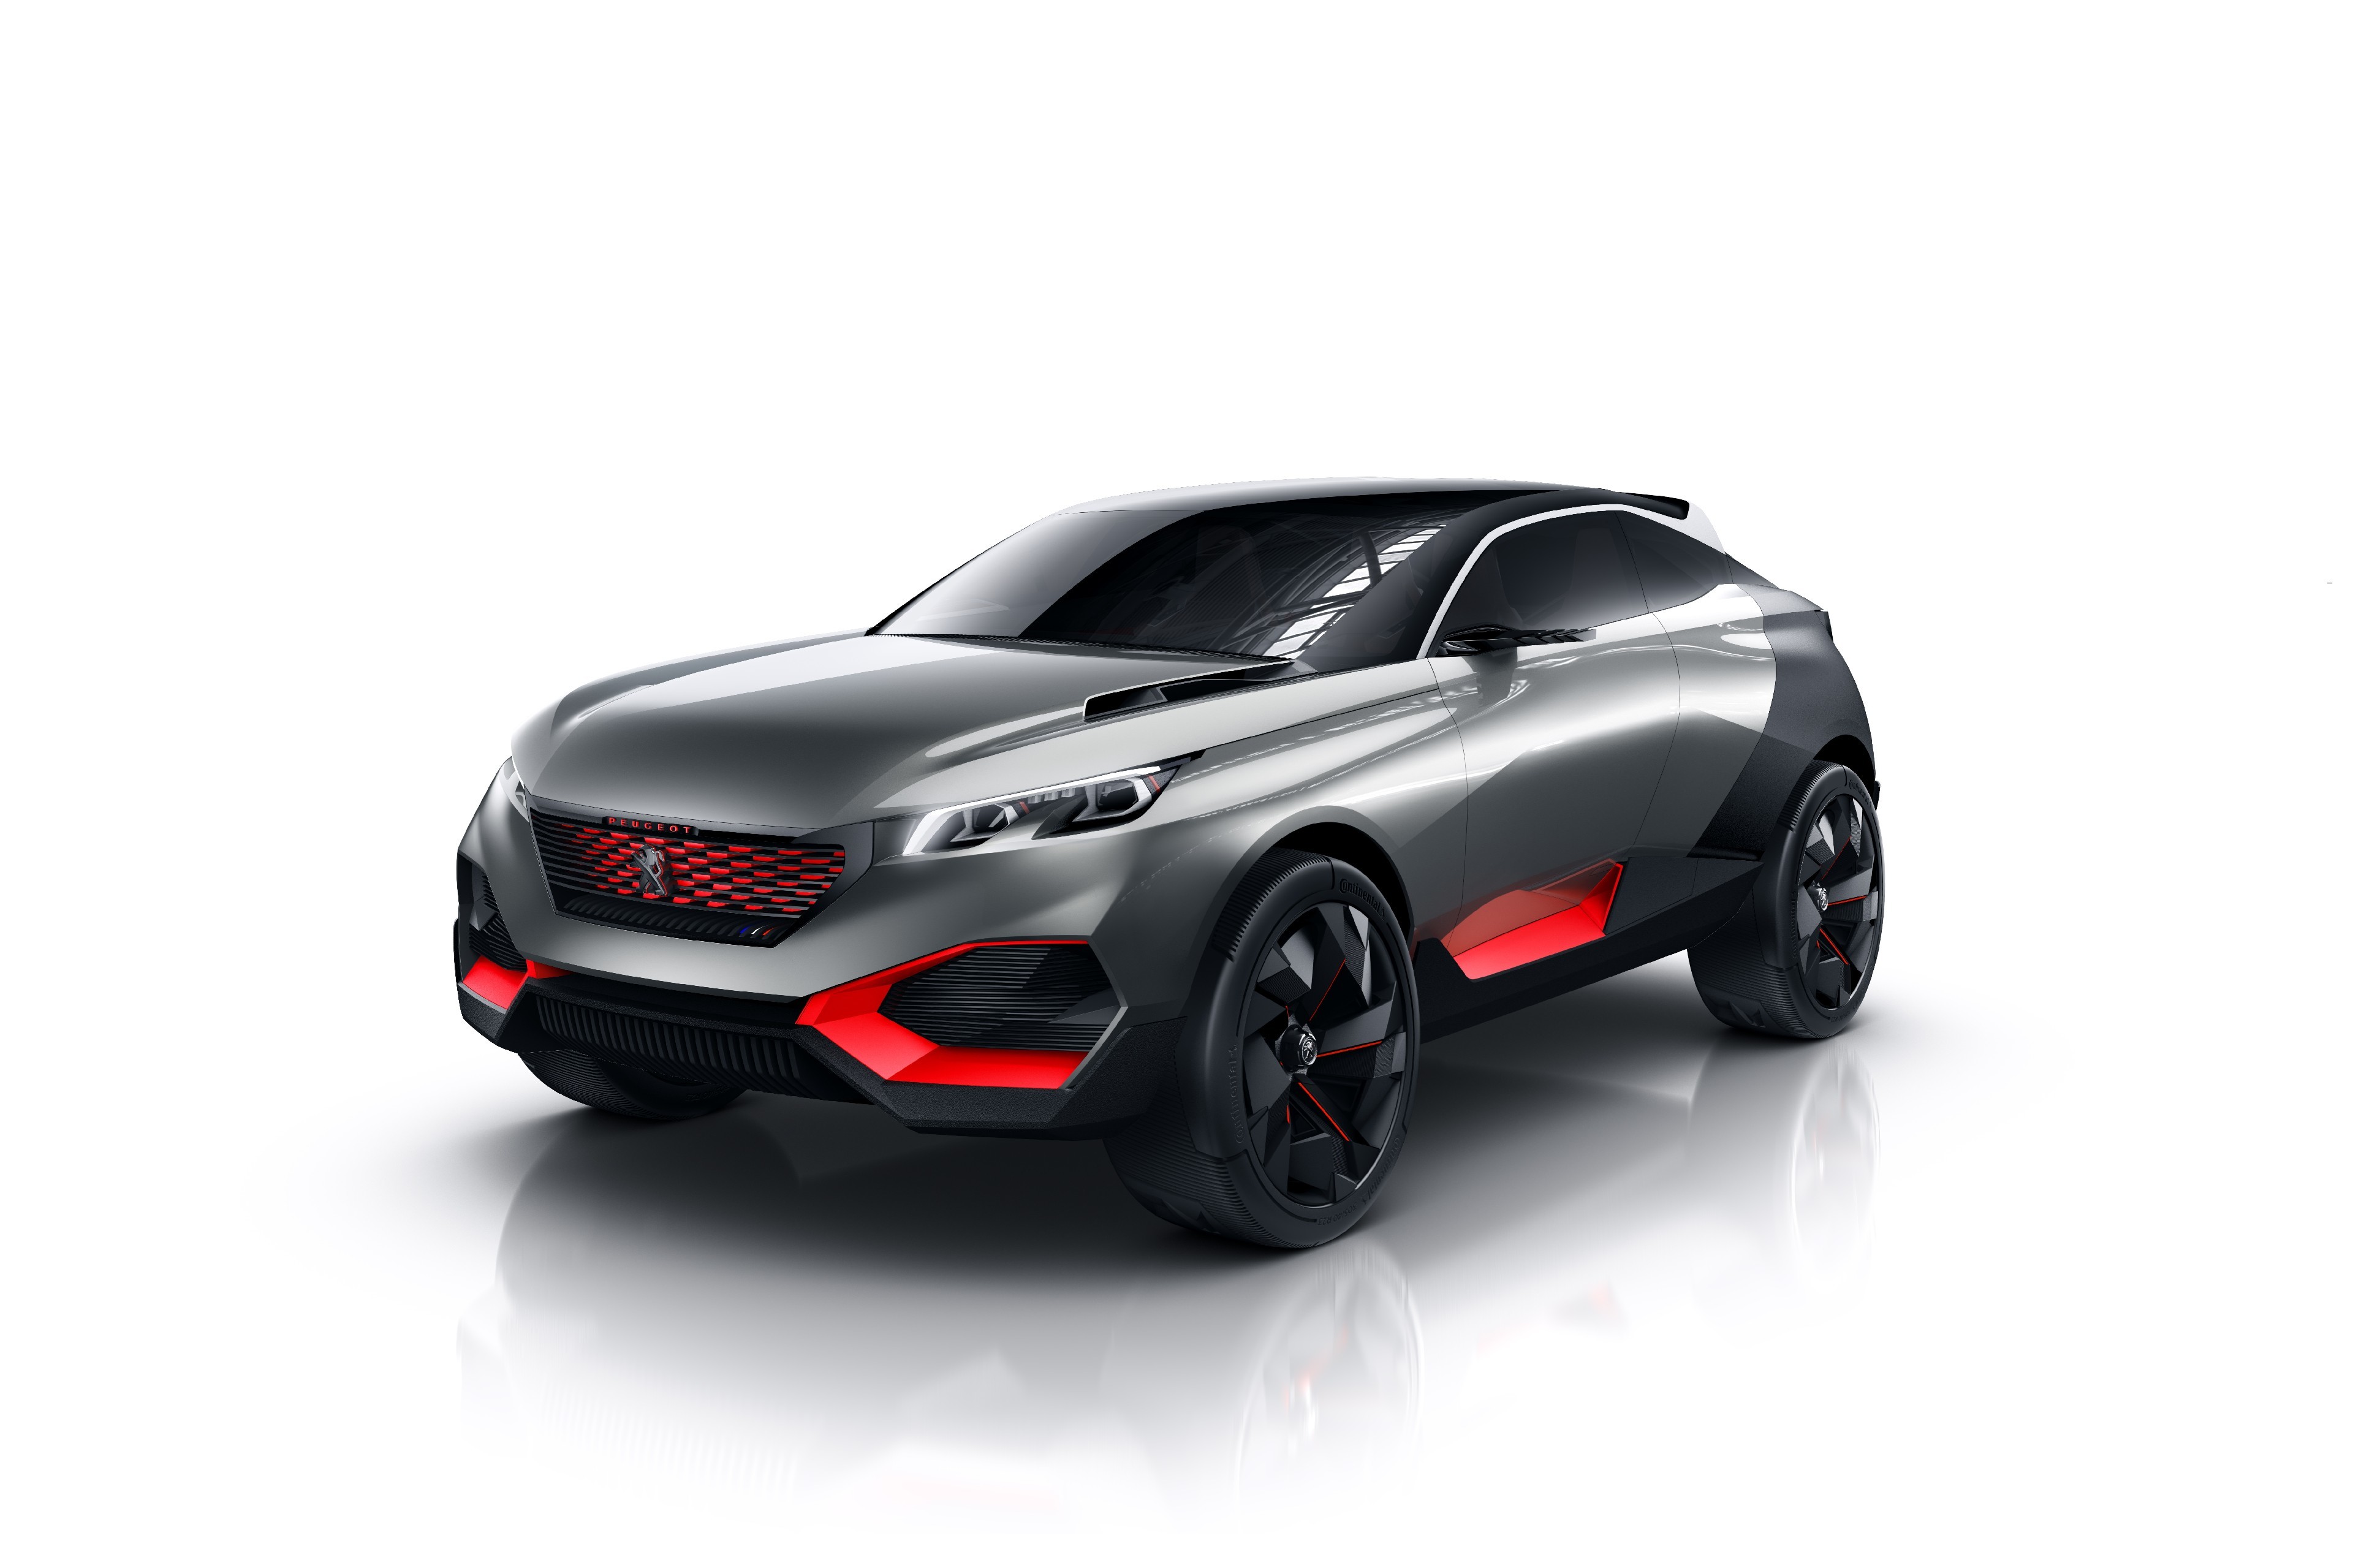 Peugeot, Crossover, Concept